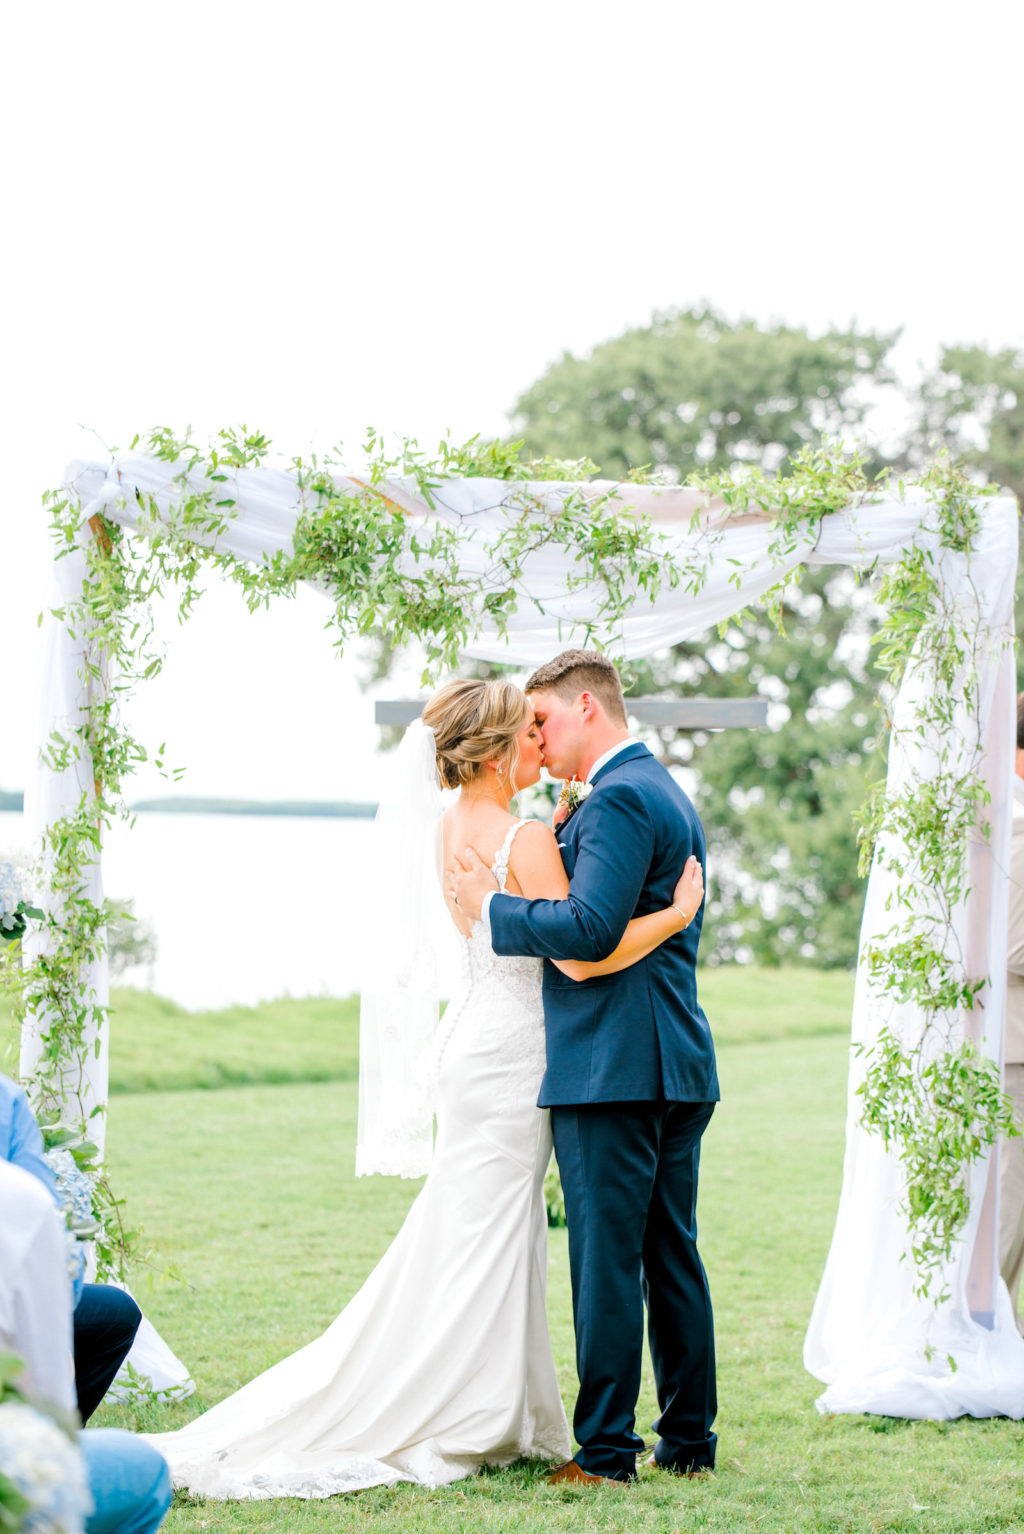 Bride and Groom First Kiss Under Beautiful Ceremony Arch with Greenery and Linen Draping | Tampa Bay Waterfront Wedding Ceremony